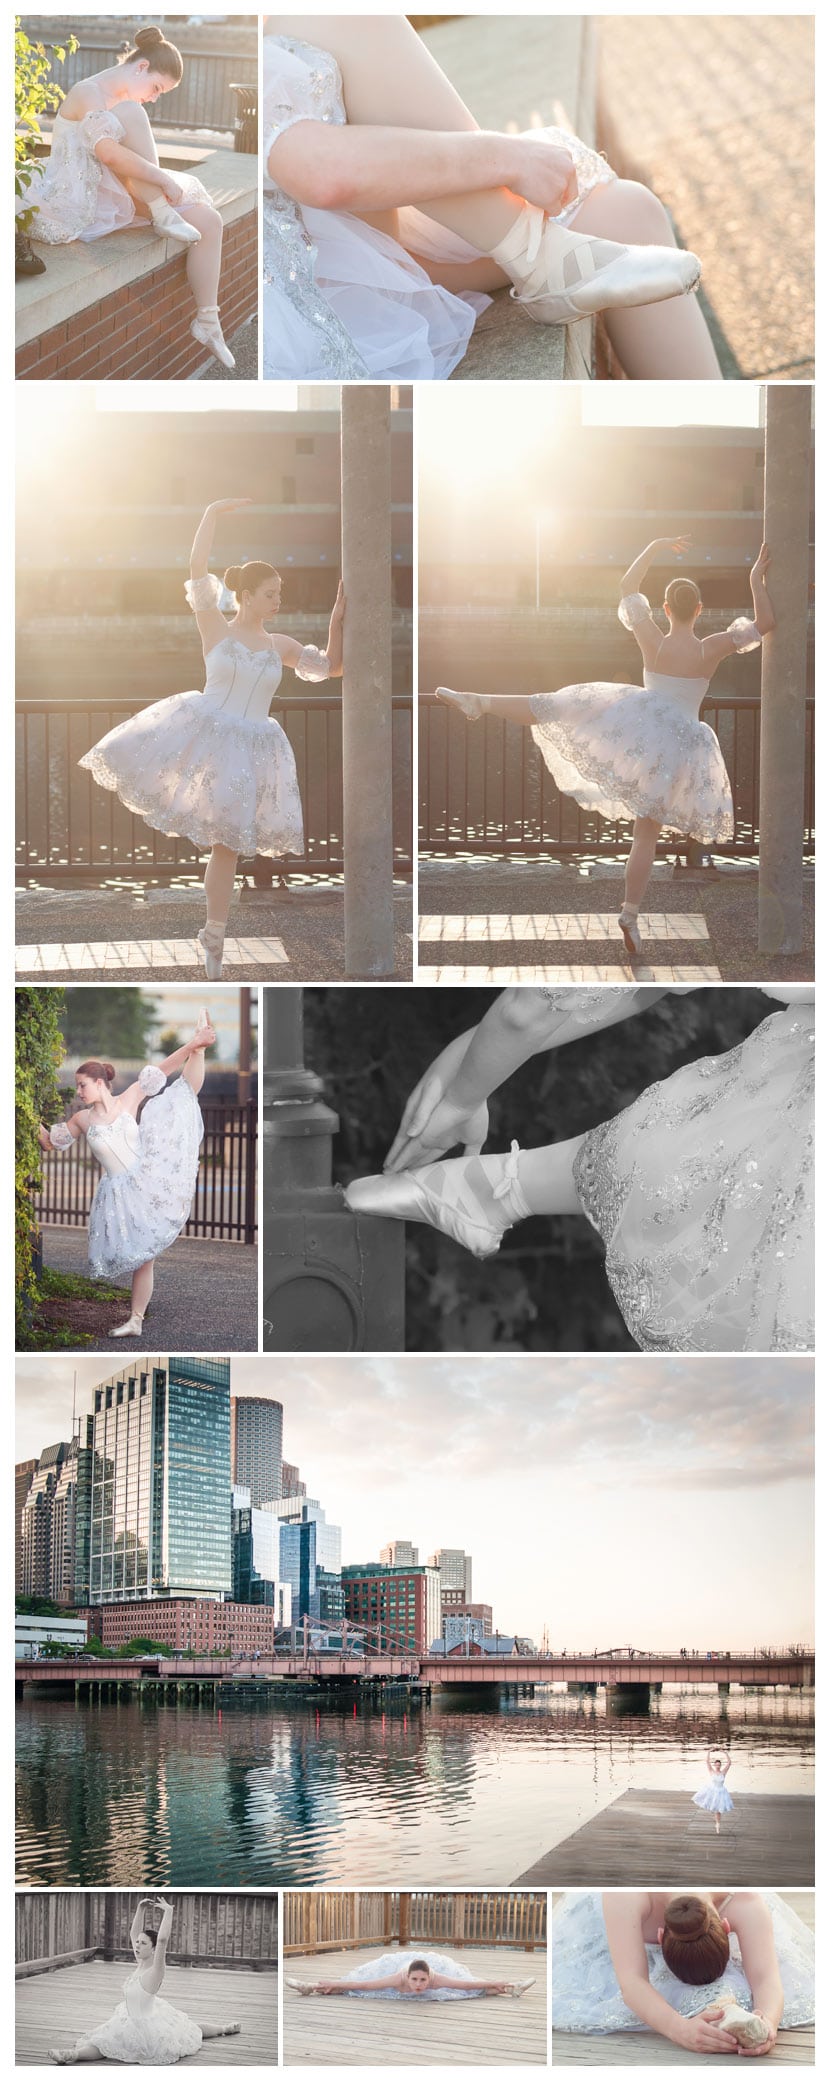 ballet dancer in boston at night | worcester ma family photographer